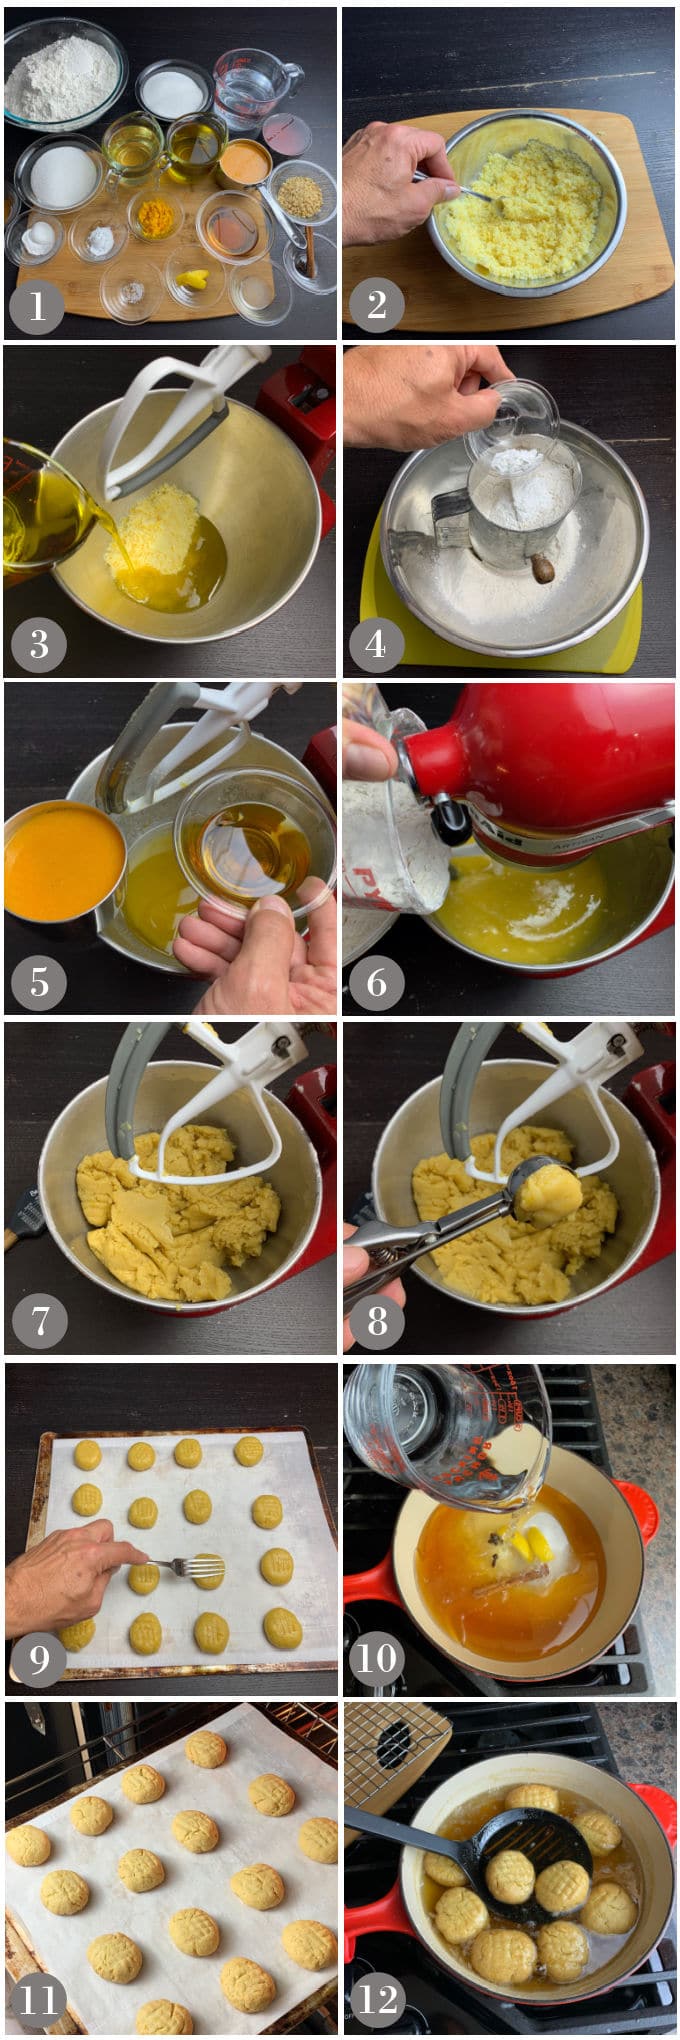 A collage of photos showing the ingredients and steps to make Greek melomakarona cookies.